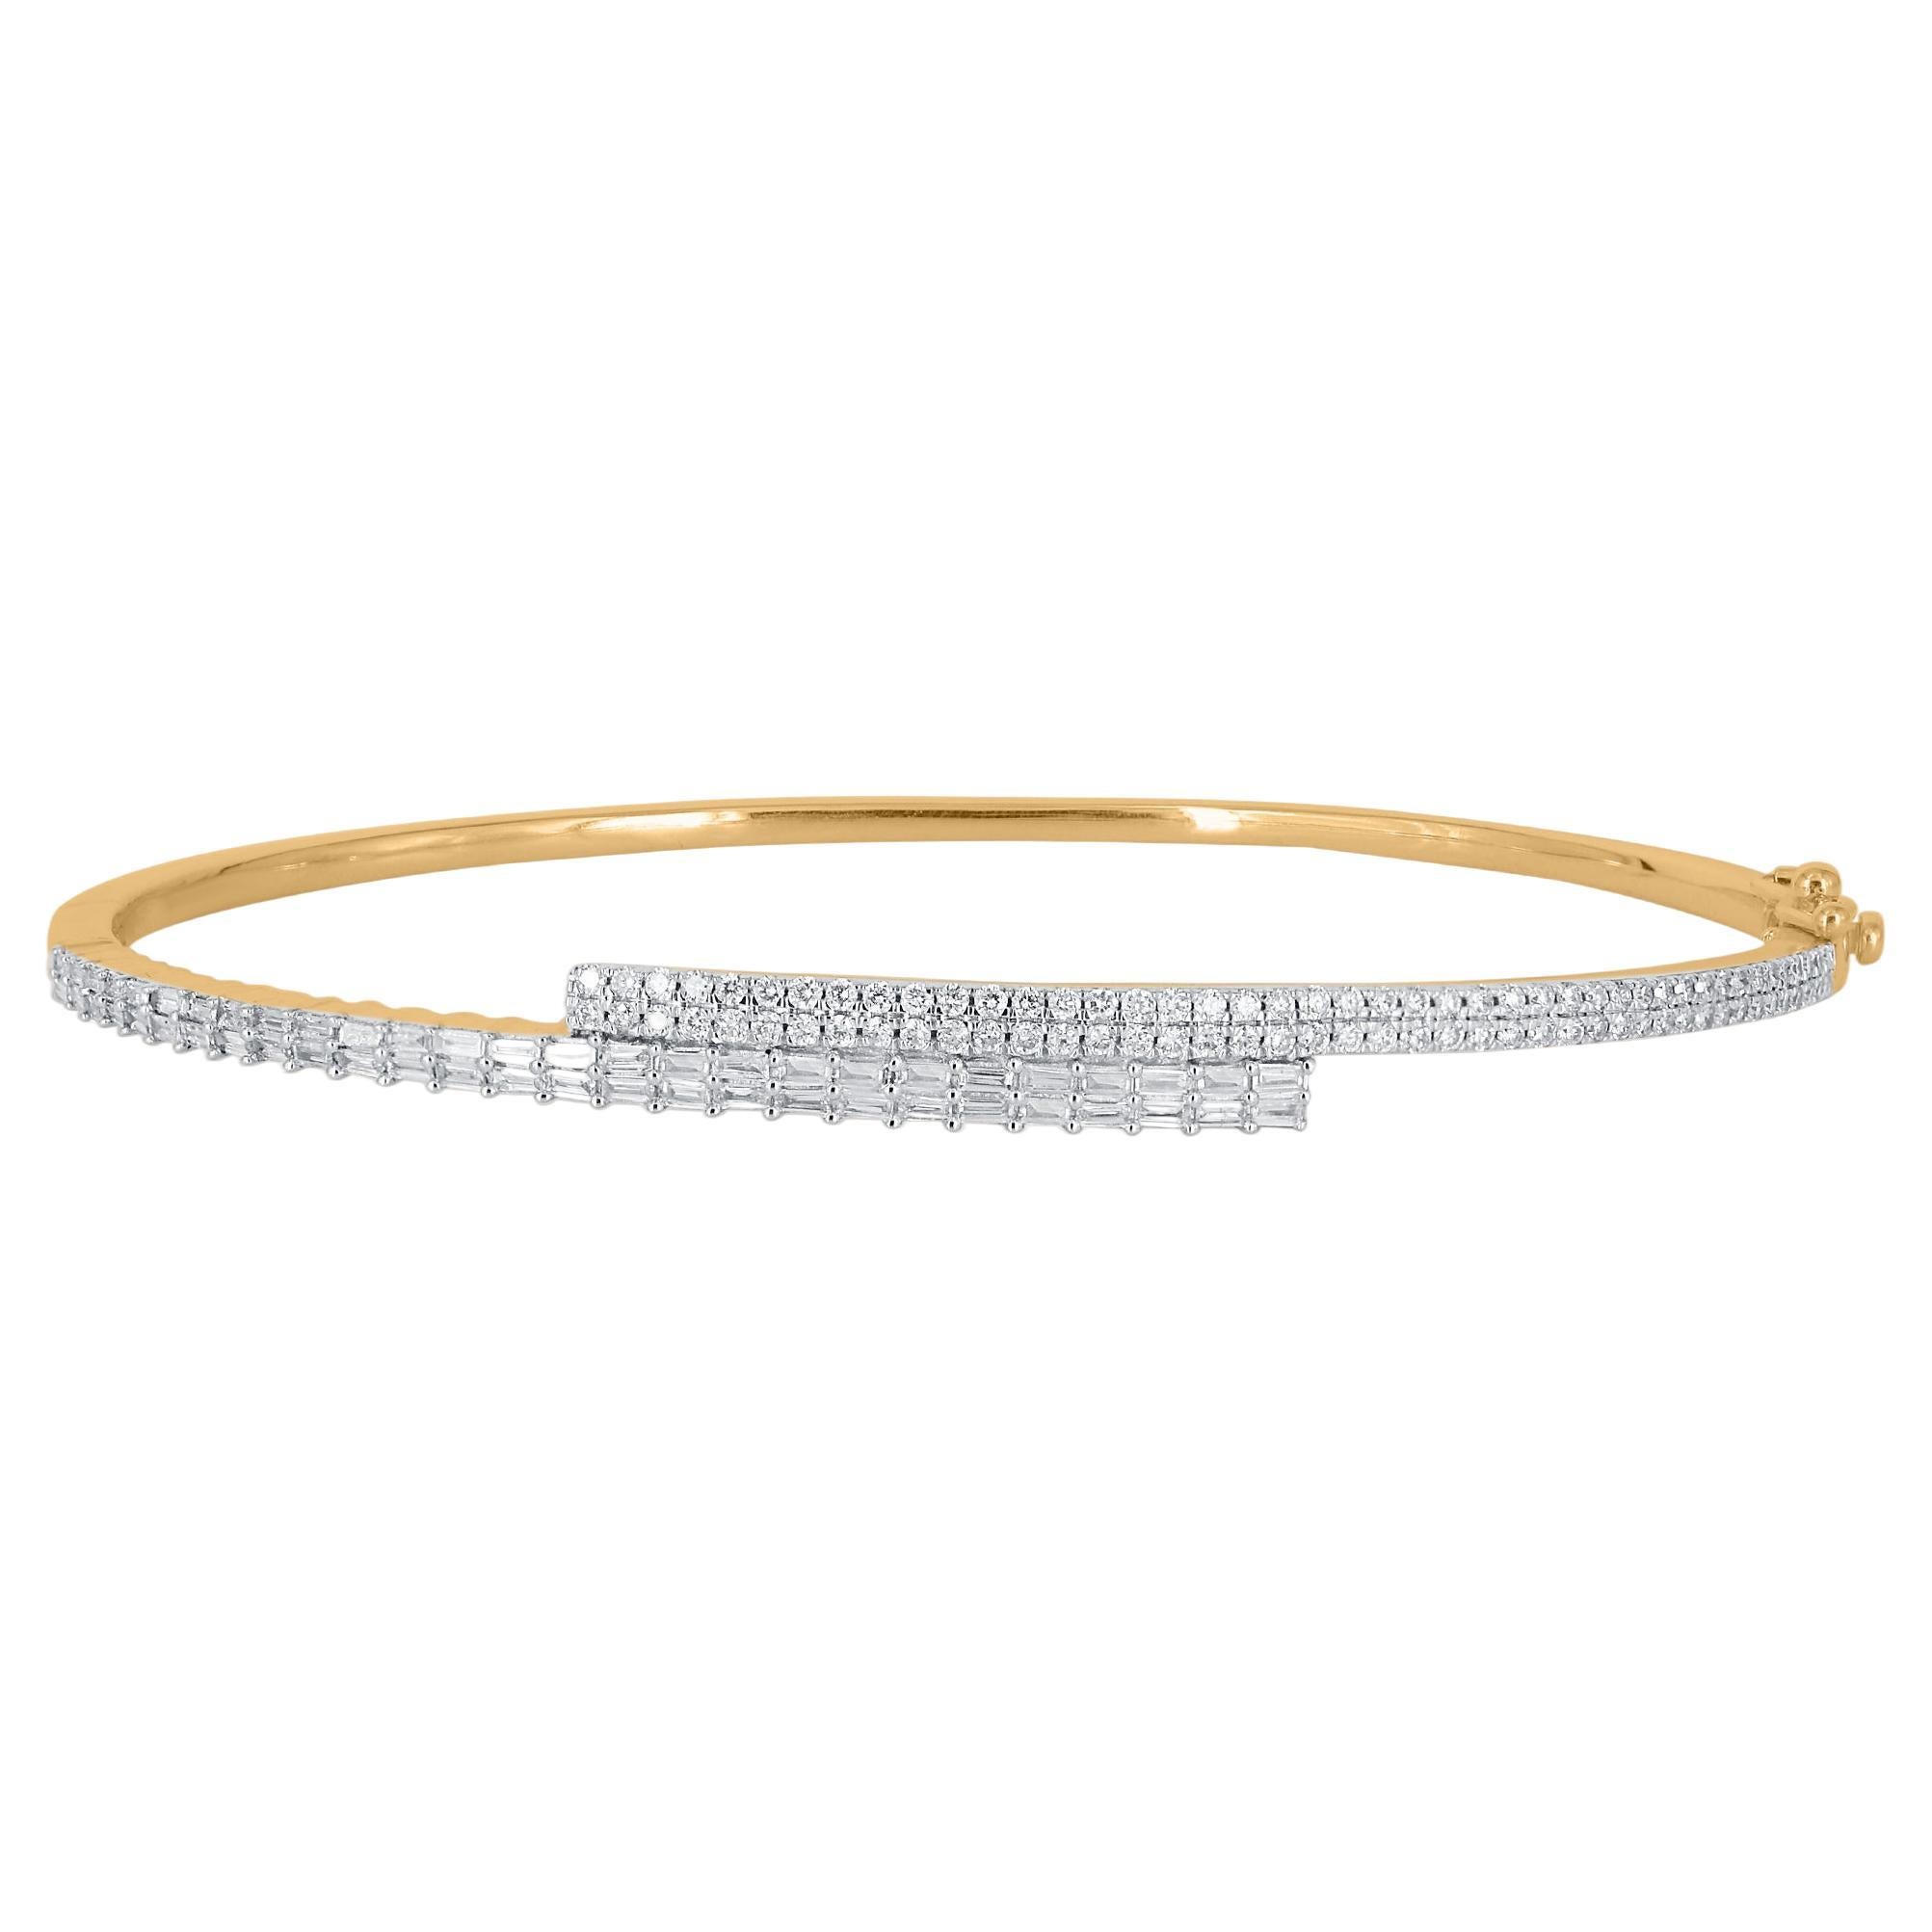 TJD 1 Carat Natural Round & Baguette Diamond Bangle Bracelet in 14KT Yellow Gold For Sale